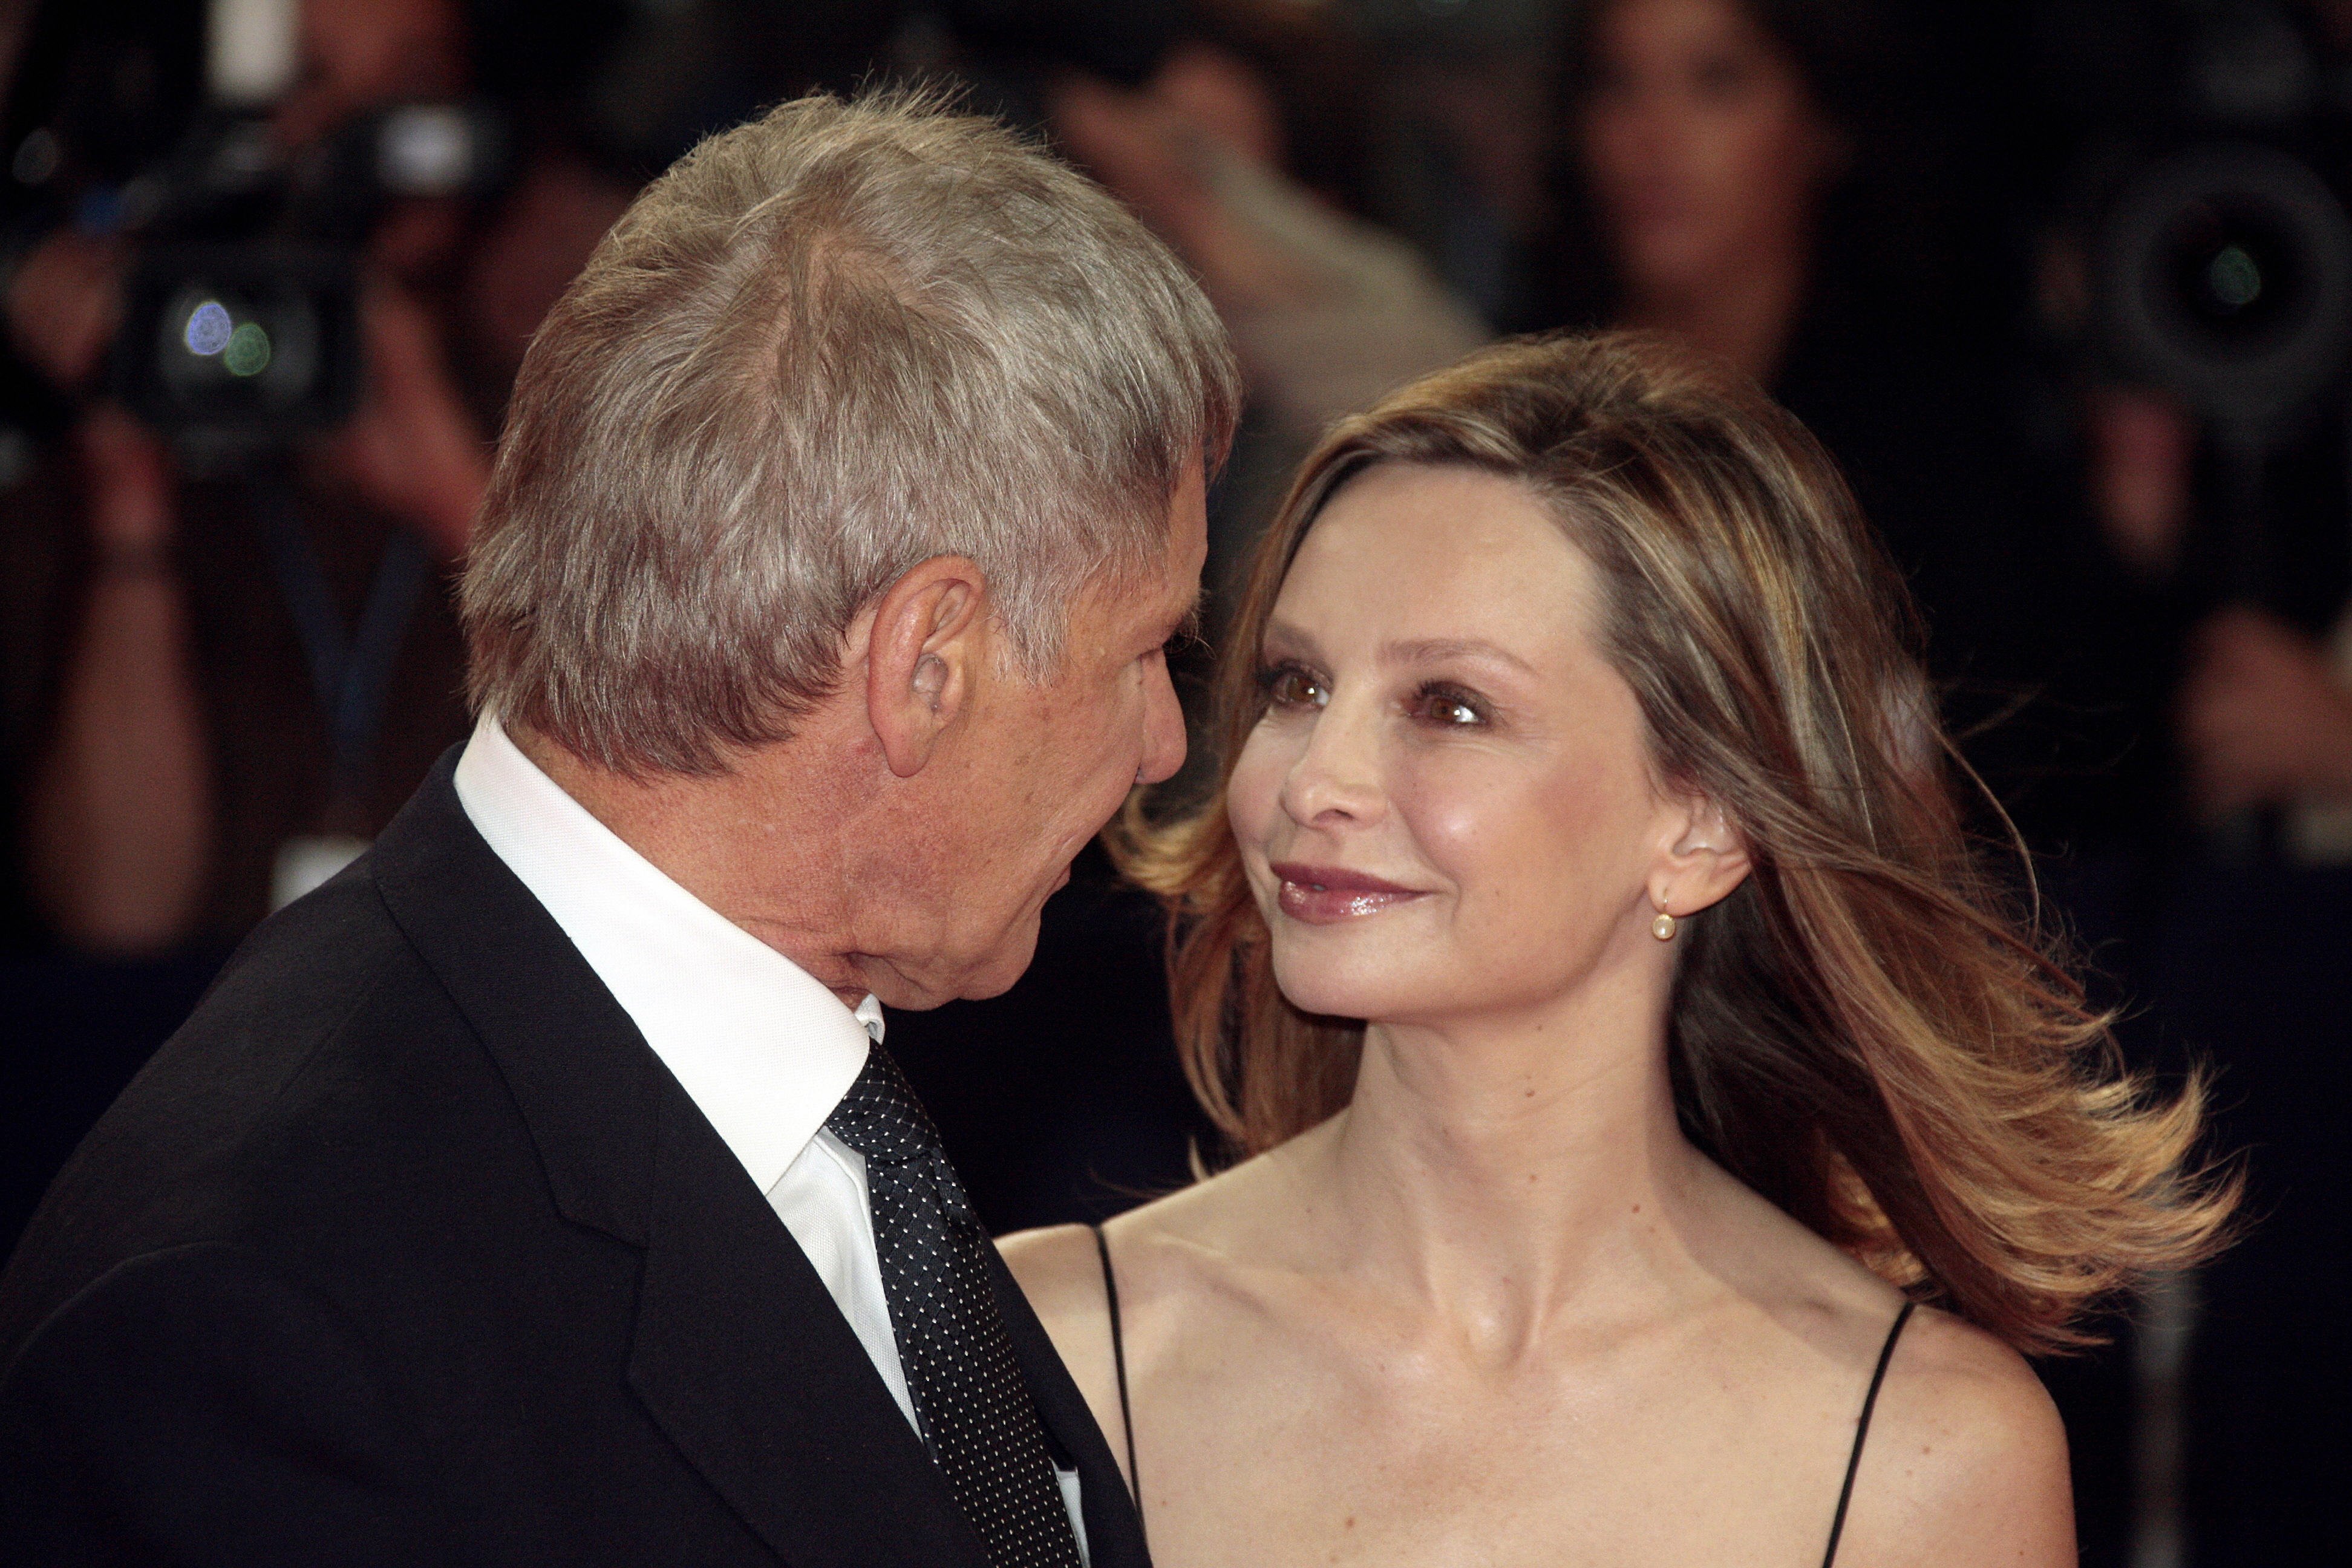 Harrison Ford and Calista Flockhart at the "The Proposal" screening on September 12, 2009, at the 35th US film festival in Deauville, western France. | Source: Getty Images